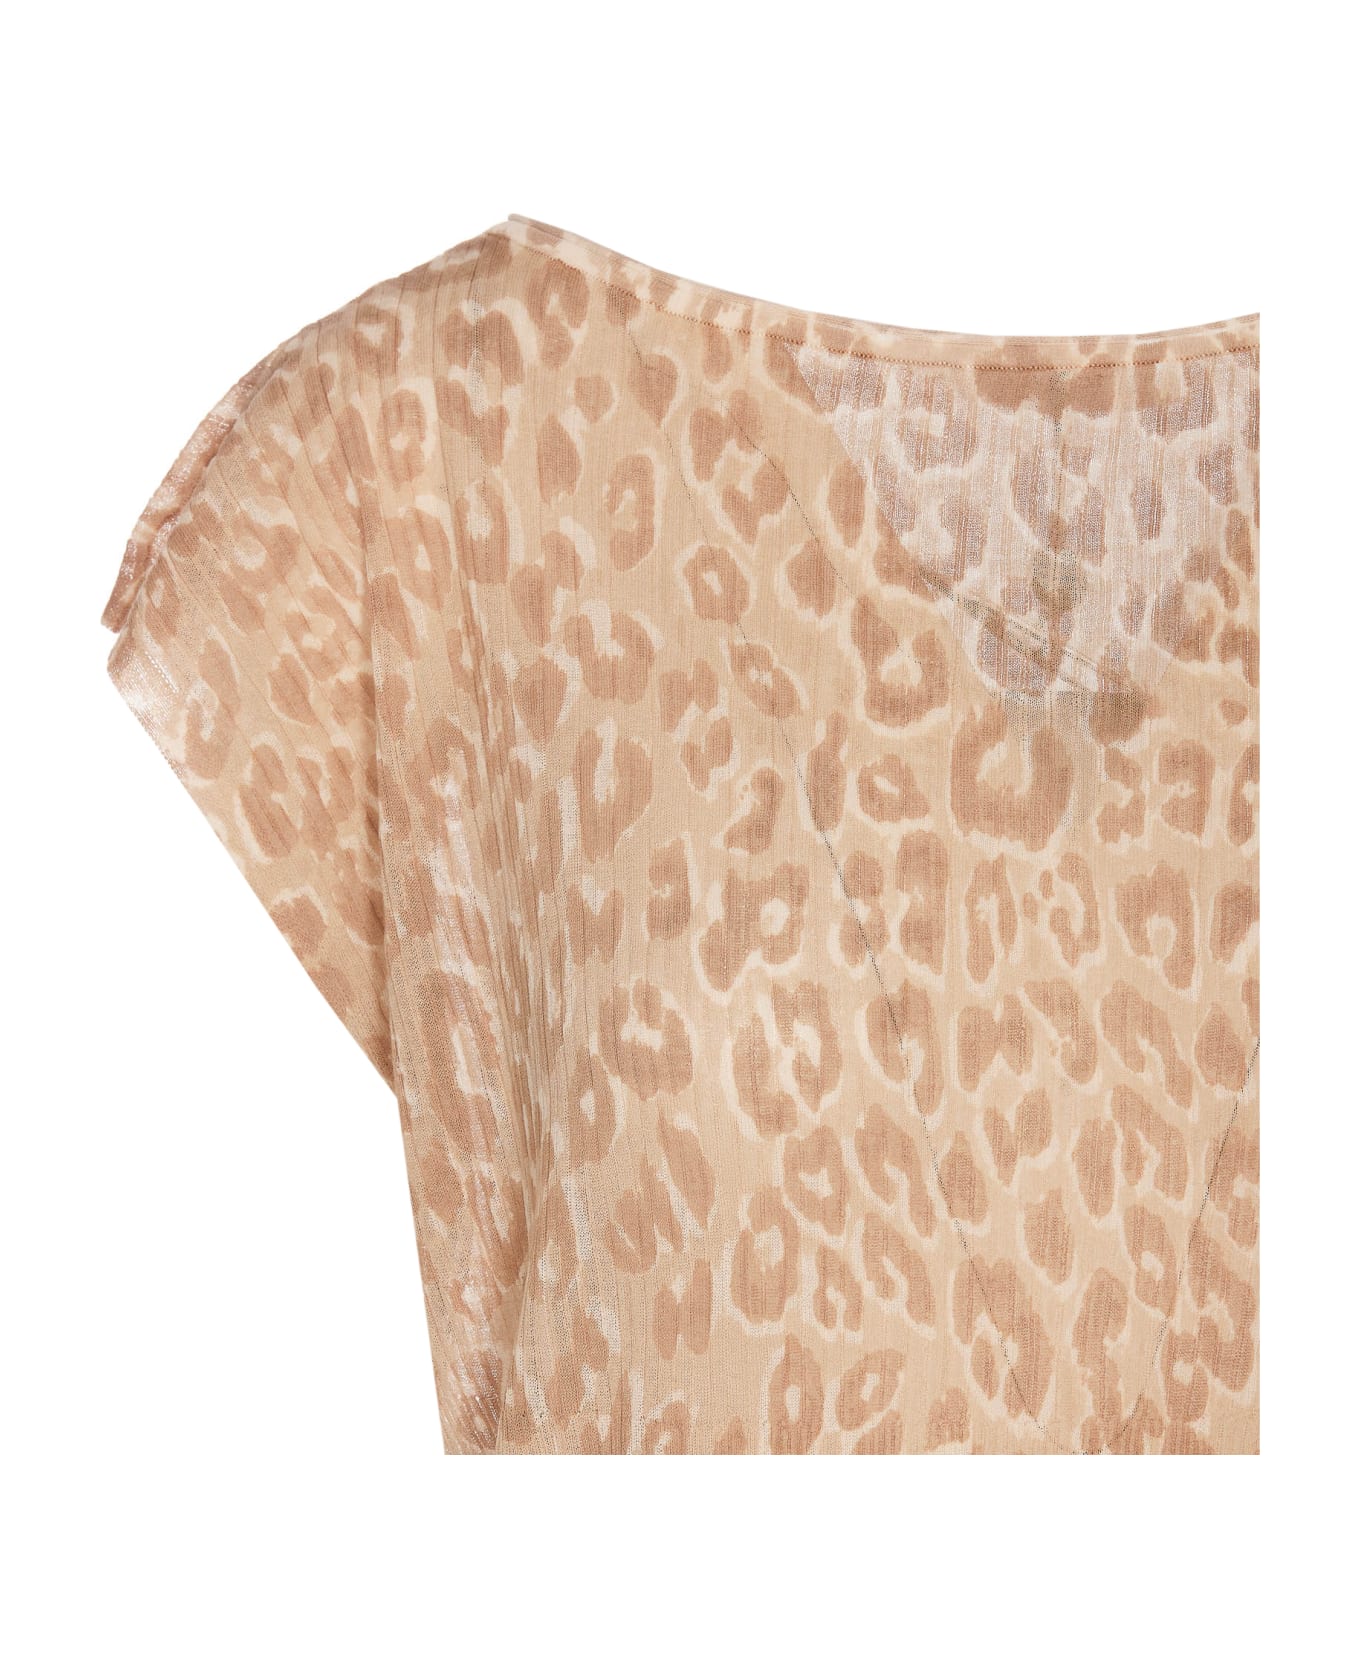 TwinSet Animalier T-shirt - Ginger Root